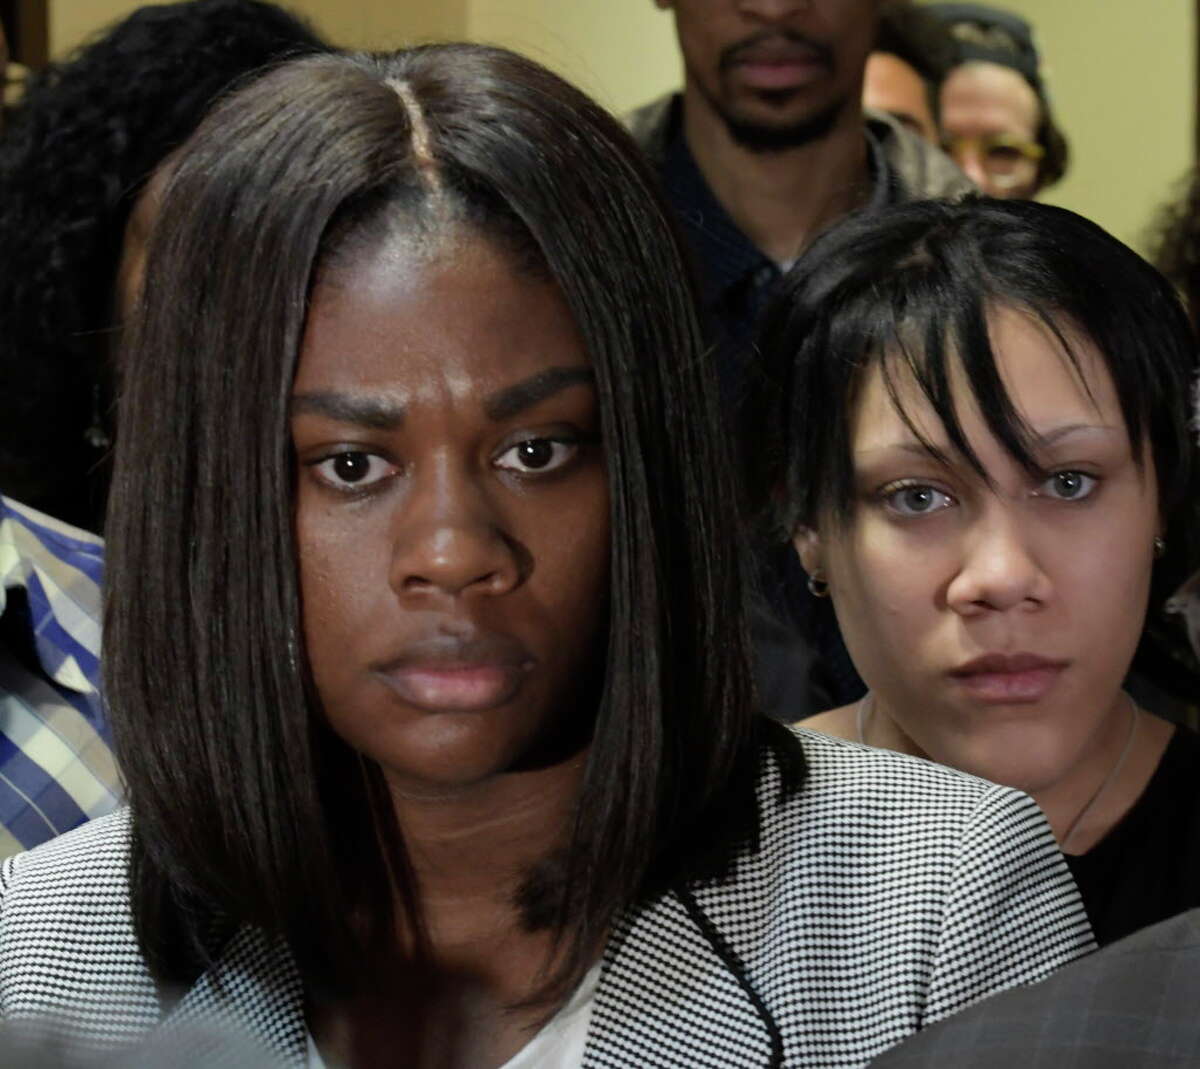 Asha Burwell, left and Ariel Agudio leave the courtroom after their sentencing Friday June 16, 2017 at the Albany County Judicial Center in Albany, N.Y. (Skip Dickstein/Times Union)